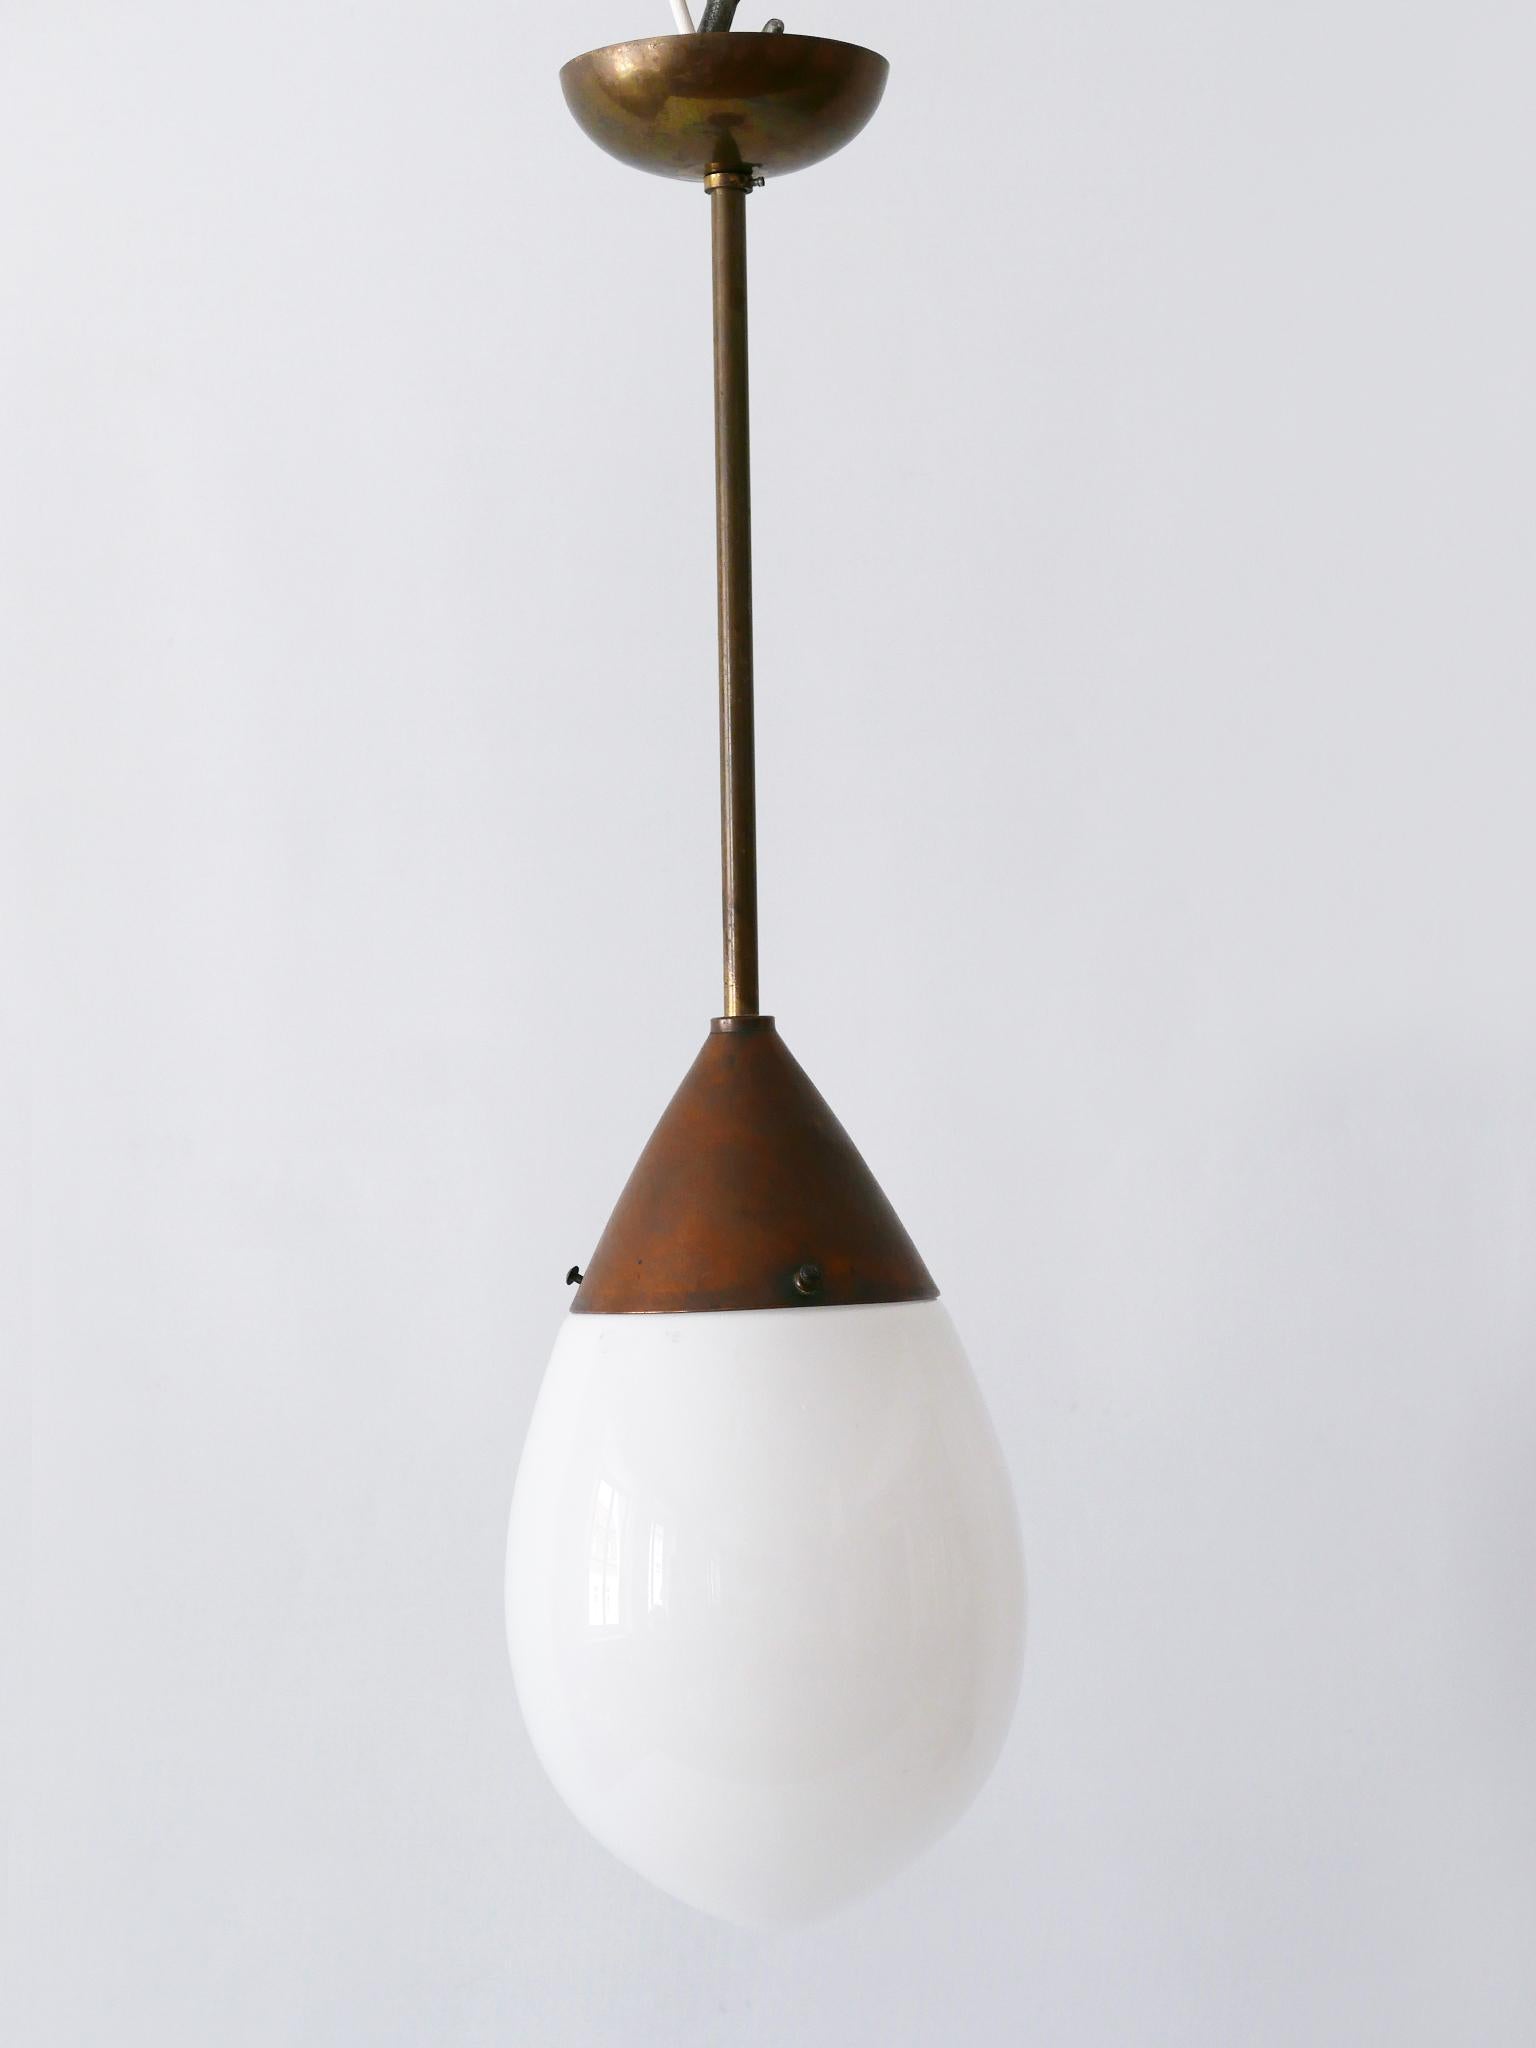 Exceptional Bauhaus Pendant Lamp or Hanging Light Drop by Siemens 1920s, Germany For Sale 11